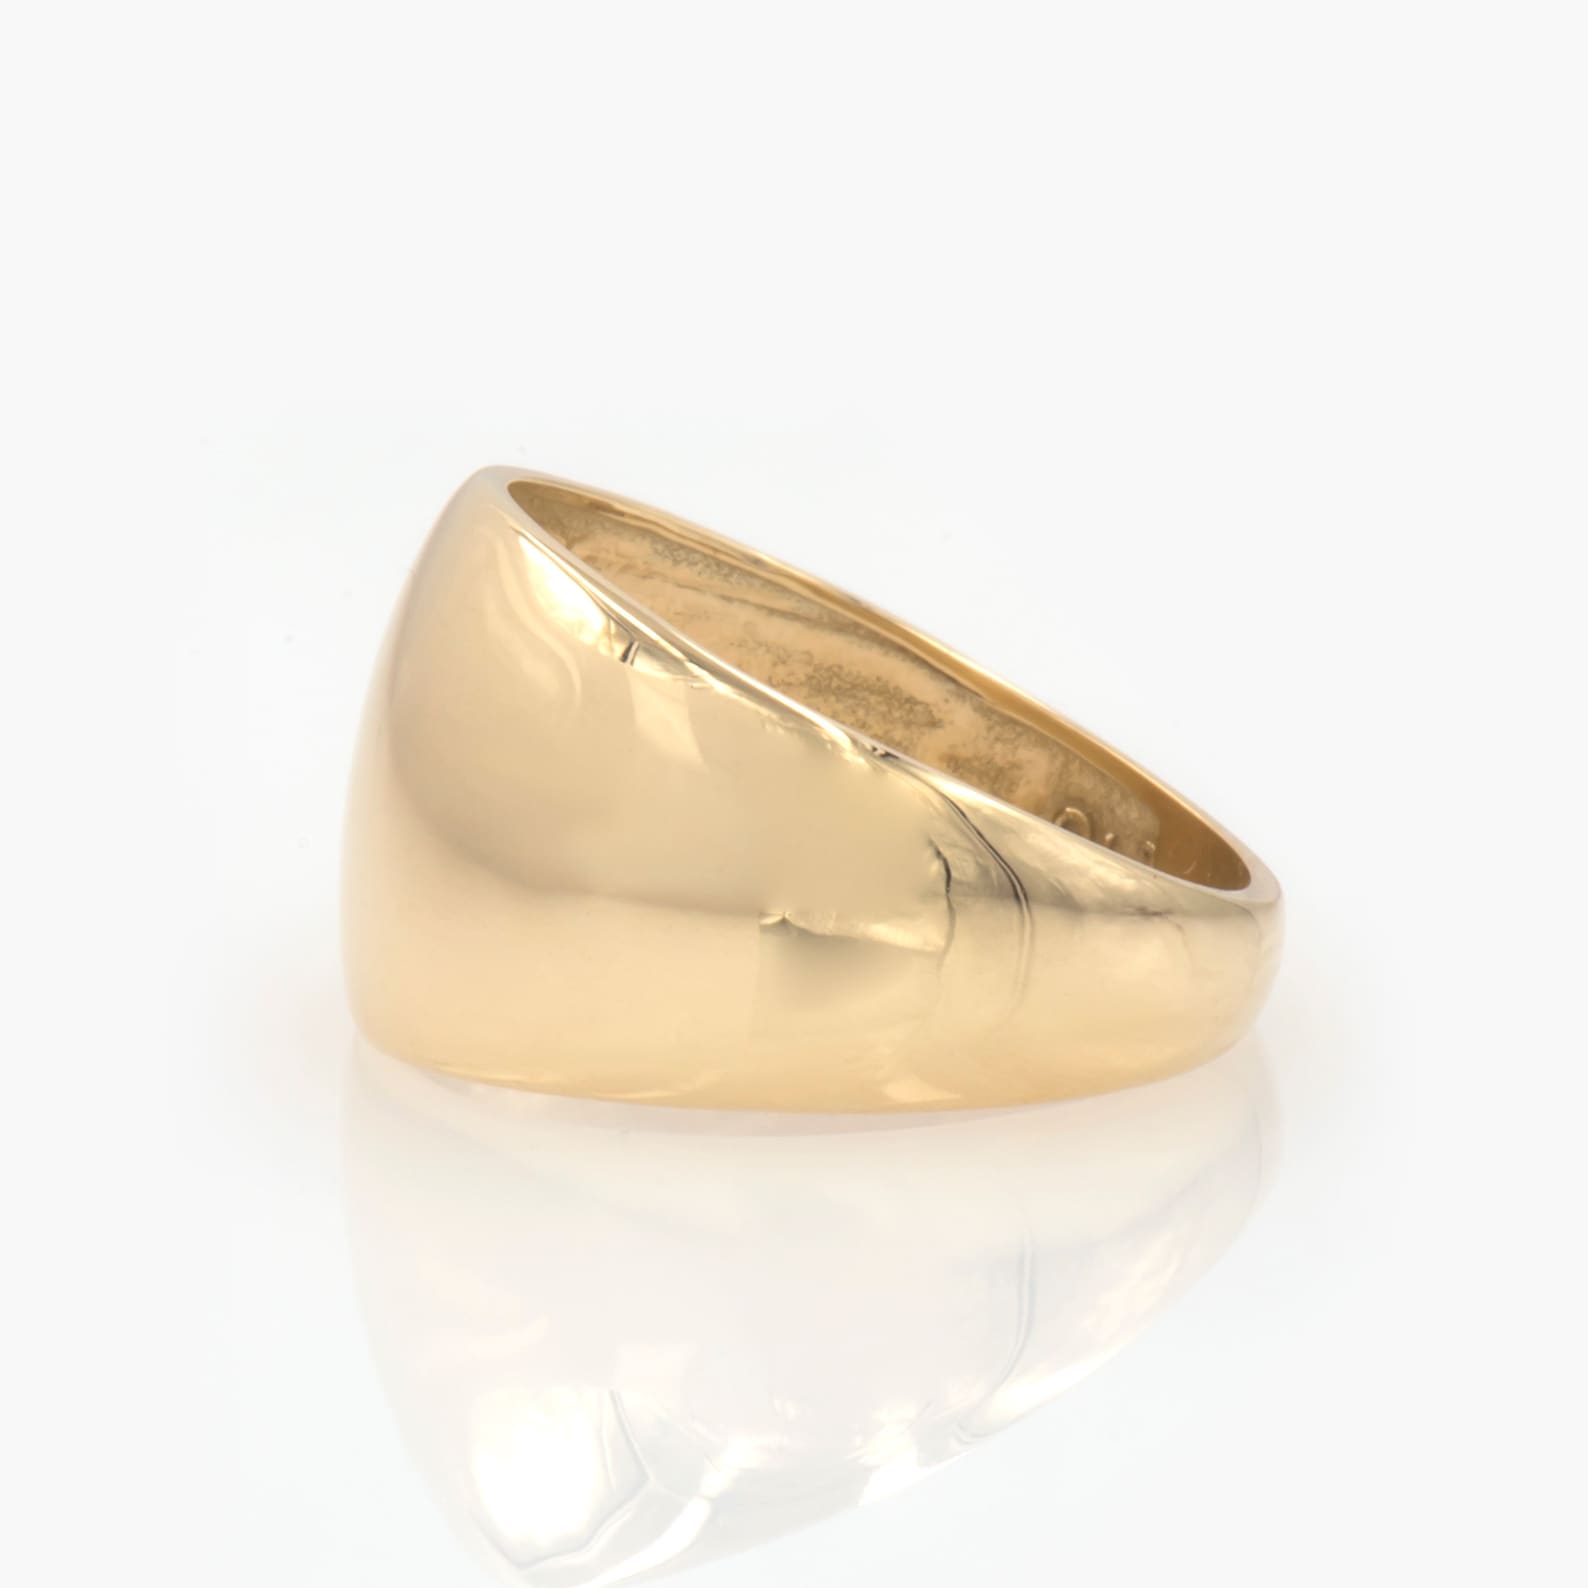 Gold Wide Signet Ring Pinky Signet Ring Solid Gold 14k Pinky - Etsy